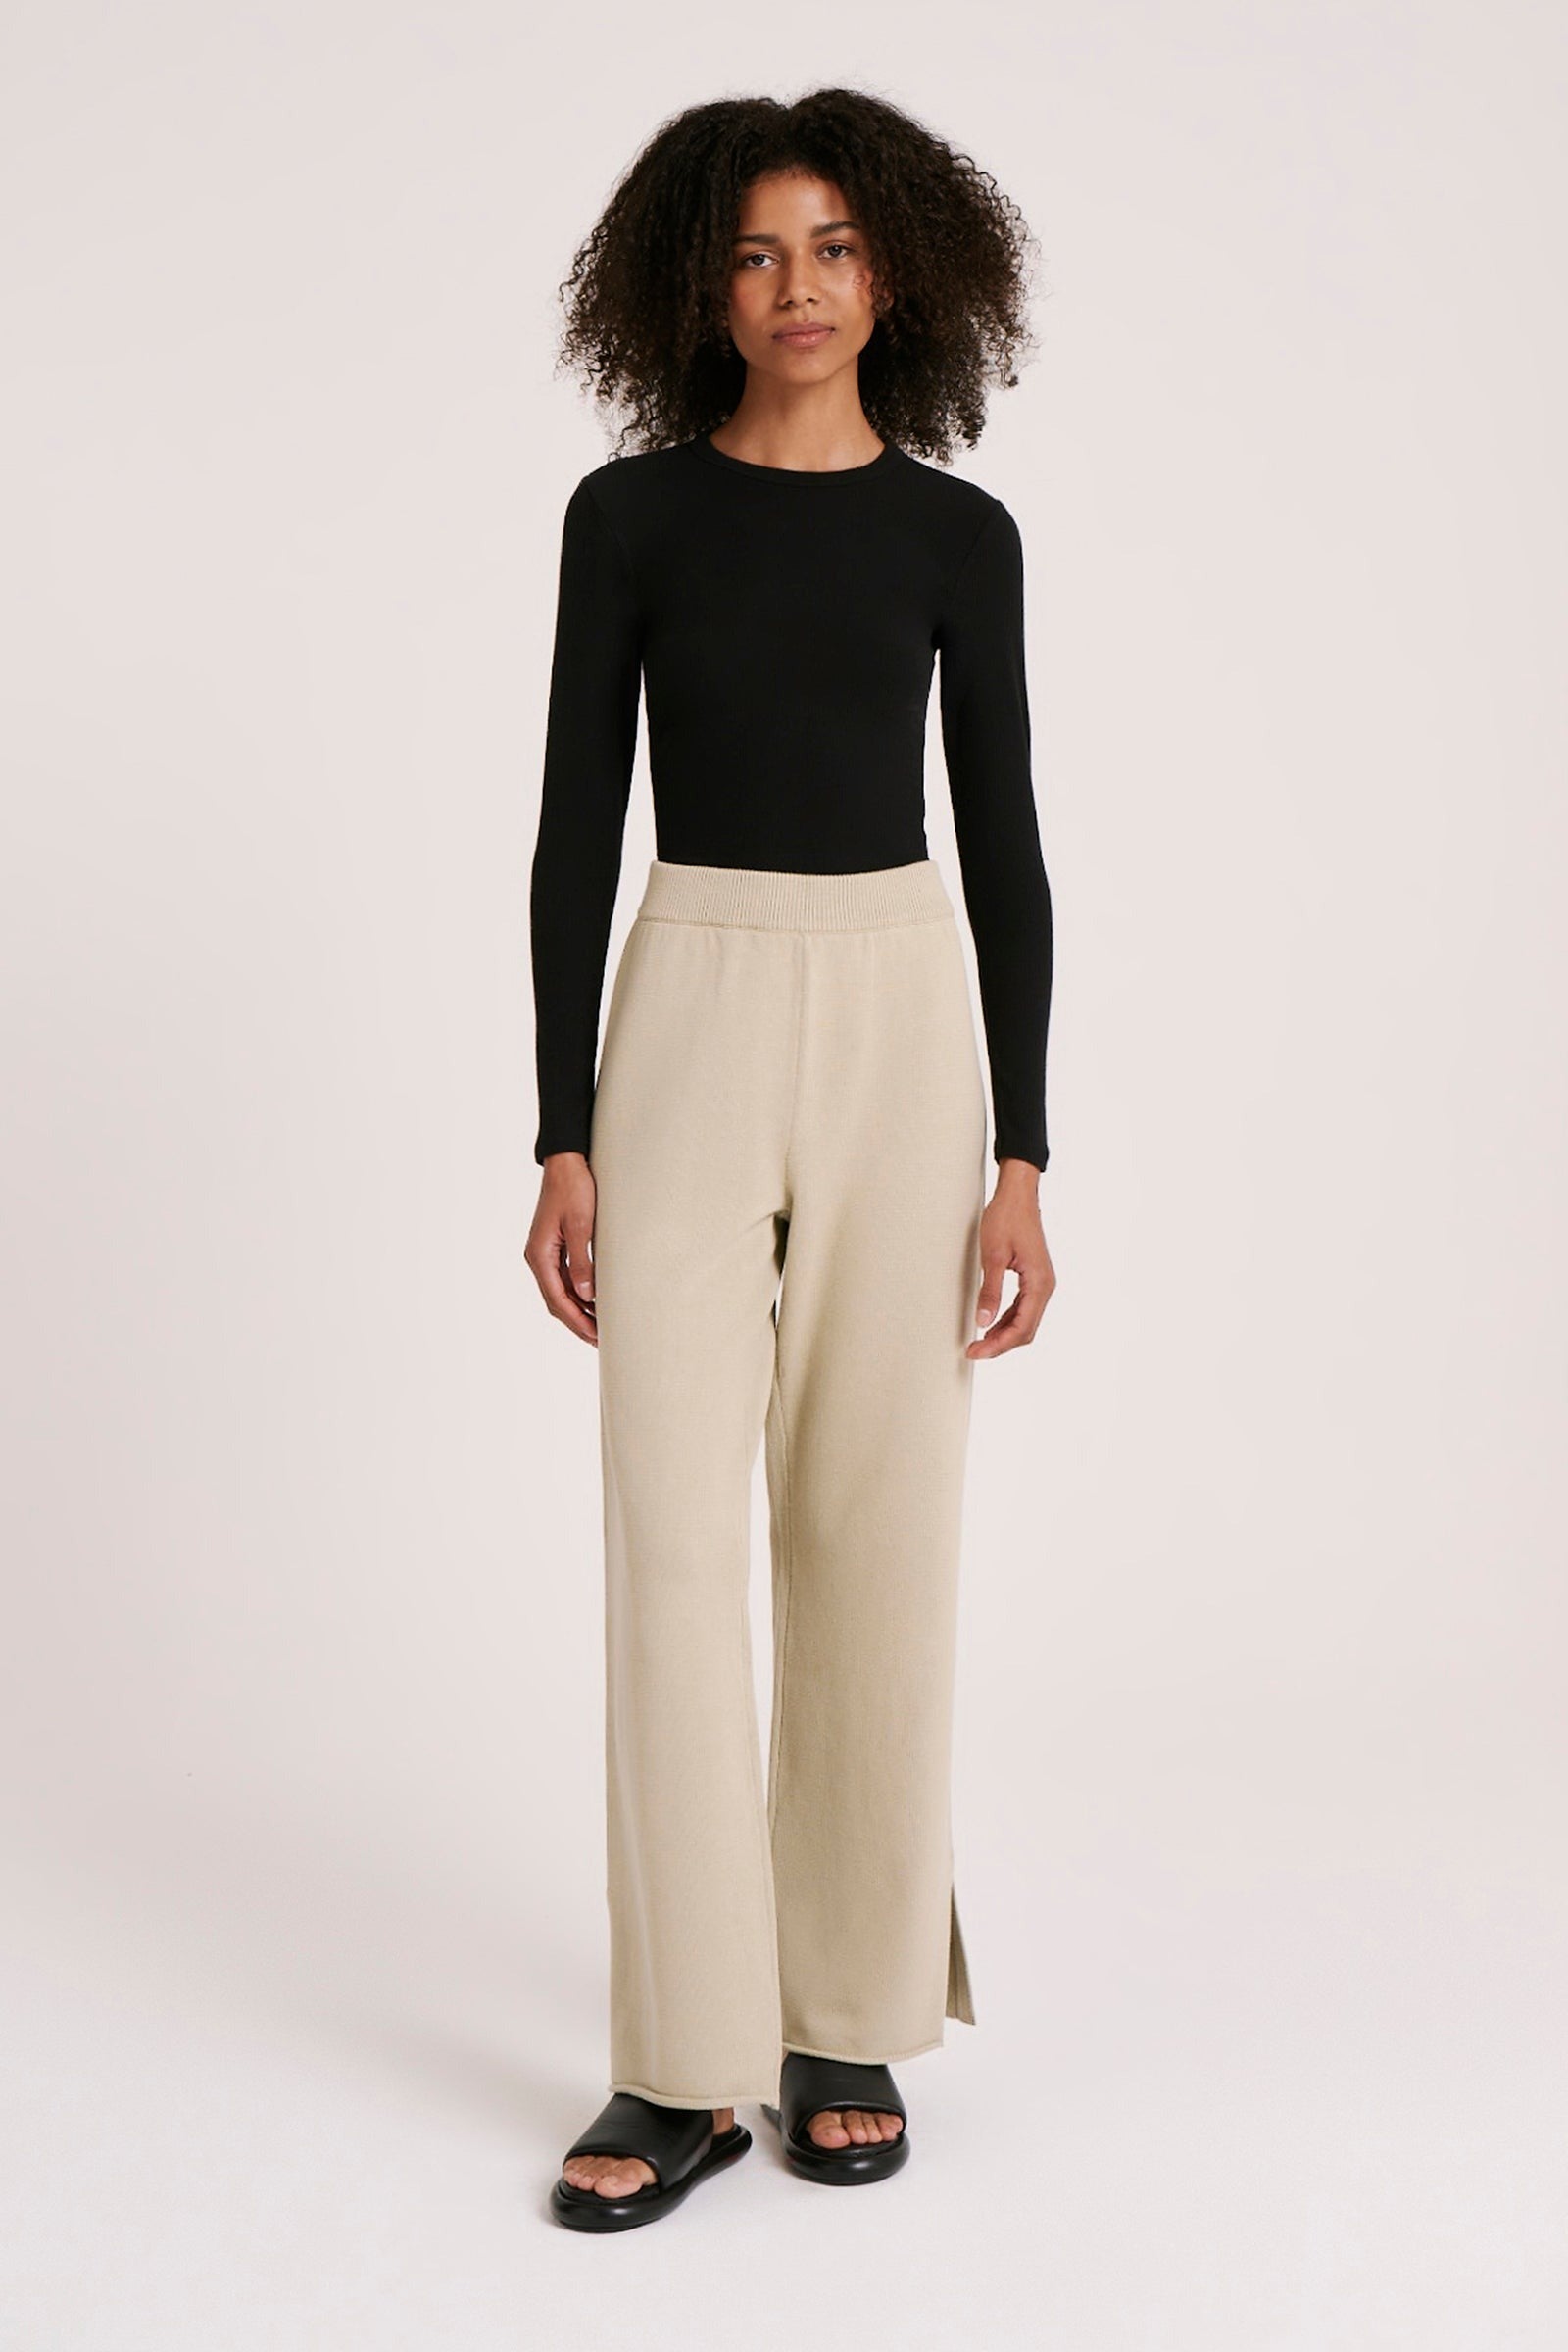 Nude Lucy | Lilou Knit Pant - Cucumber